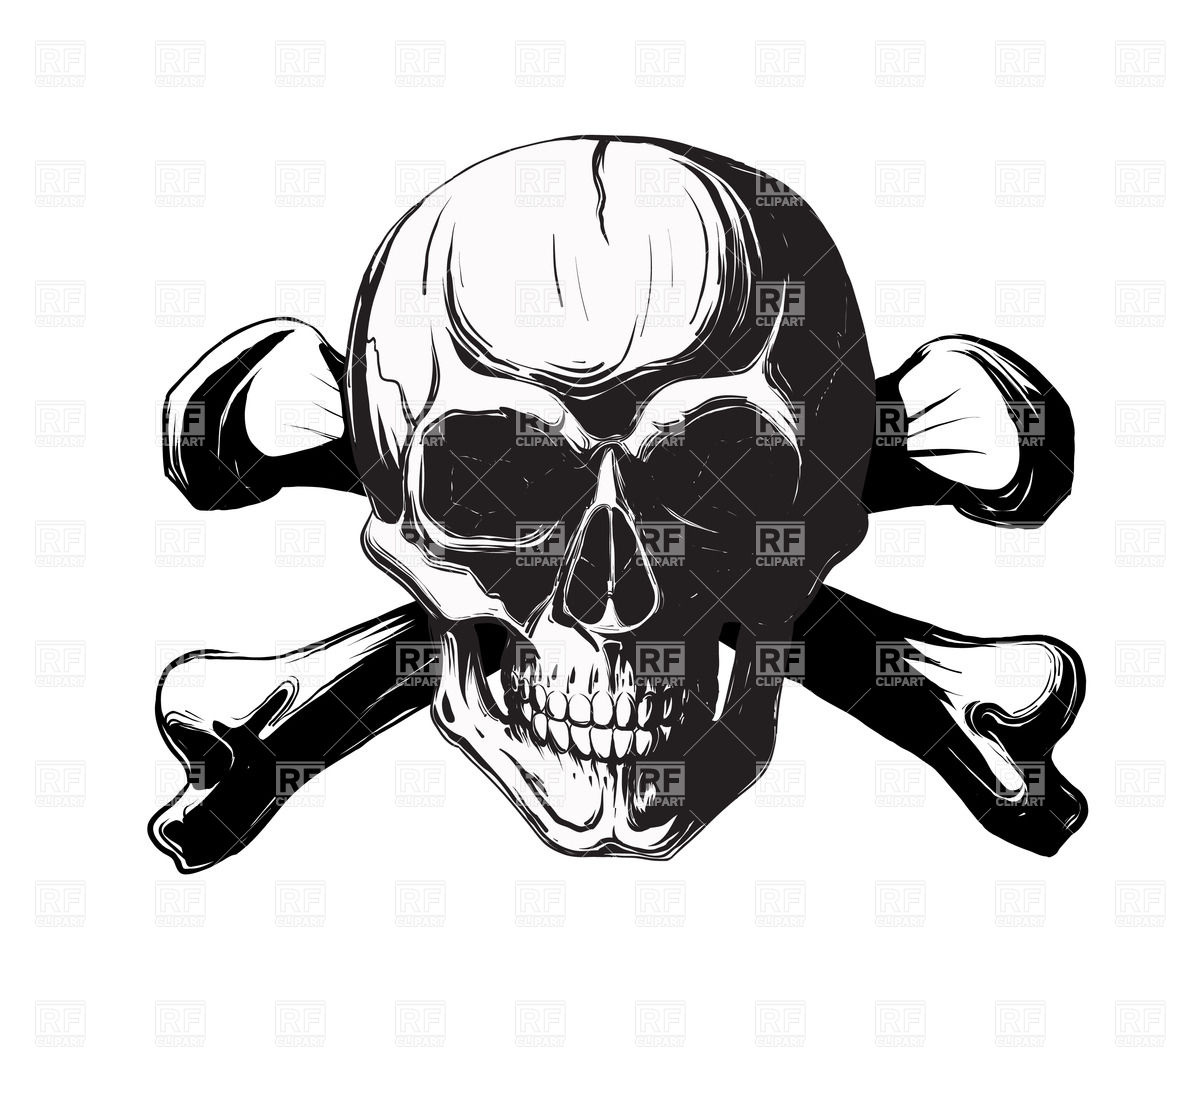 Human Skull And Bones  Pirate Symbol Isolated On A White Background